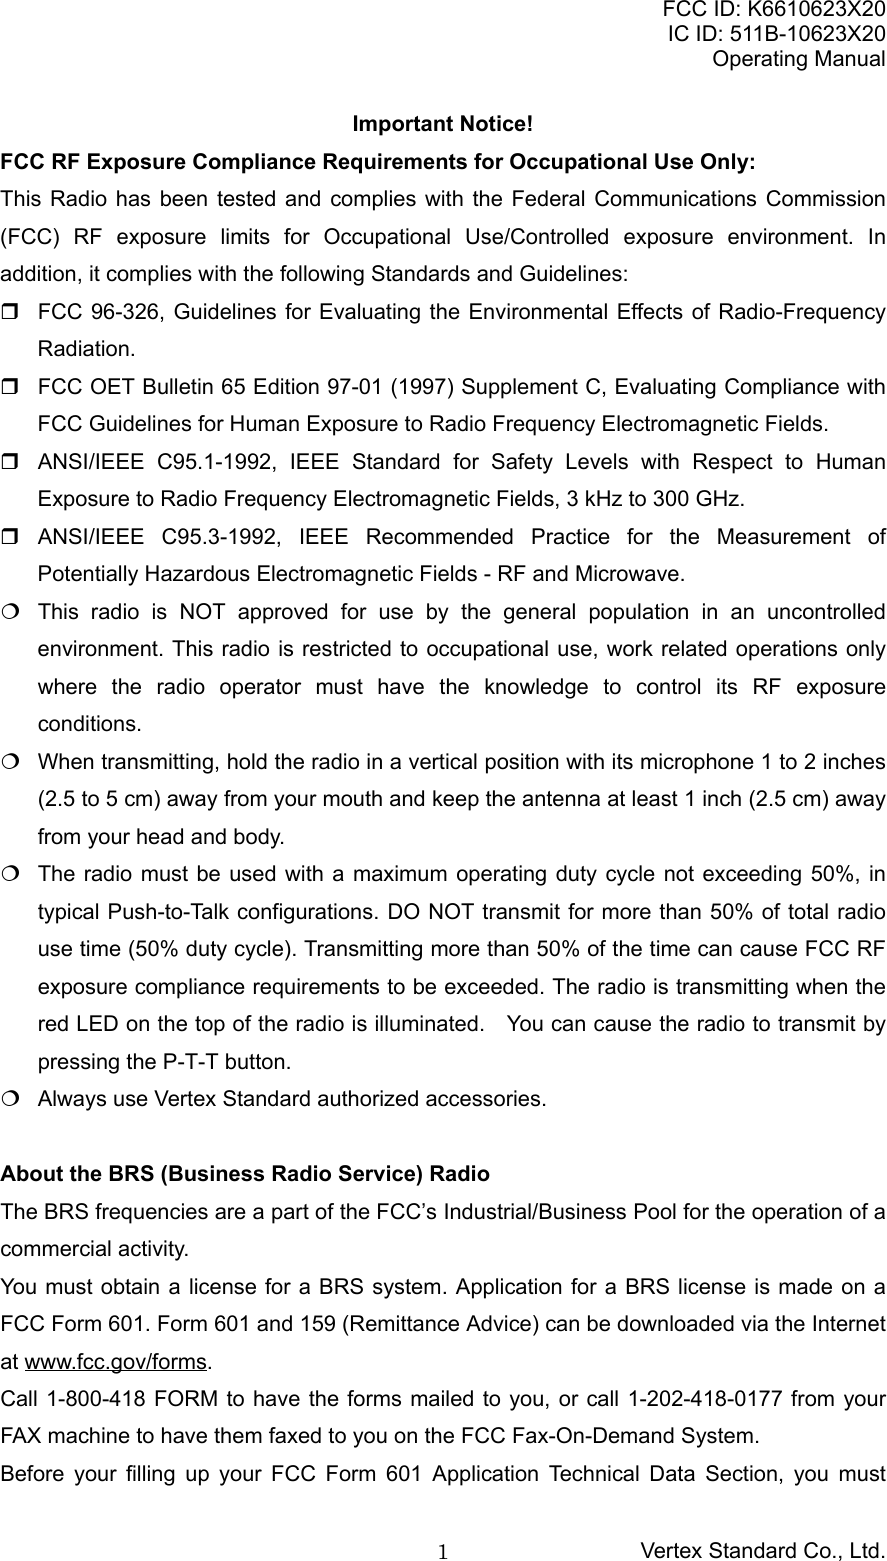 FCC ID: K6610623X20IC ID: 511B-10623X20Operating ManualVertex Standard Co., Ltd.1Important Notice!FCC RF Exposure Compliance Requirements for Occupational Use Only:This Radio has been tested and complies with the Federal Communications Commission(FCC) RF exposure limits for Occupational Use/Controlled exposure environment. Inaddition, it complies with the following Standards and Guidelines:  FCC 96-326, Guidelines for Evaluating the Environmental Effects of Radio-FrequencyRadiation.  FCC OET Bulletin 65 Edition 97-01 (1997) Supplement C, Evaluating Compliance withFCC Guidelines for Human Exposure to Radio Frequency Electromagnetic Fields.  ANSI/IEEE C95.1-1992, IEEE Standard for Safety Levels with Respect to HumanExposure to Radio Frequency Electromagnetic Fields, 3 kHz to 300 GHz. ANSI/IEEE C95.3-1992, IEEE Recommended Practice for the Measurement ofPotentially Hazardous Electromagnetic Fields - RF and Microwave.  This radio is NOT approved for use by the general population in an uncontrolledenvironment. This radio is restricted to occupational use, work related operations onlywhere the radio operator must have the knowledge to control its RF exposureconditions.  When transmitting, hold the radio in a vertical position with its microphone 1 to 2 inches(2.5 to 5 cm) away from your mouth and keep the antenna at least 1 inch (2.5 cm) awayfrom your head and body.  The radio must be used with a maximum operating duty cycle not exceeding 50%, intypical Push-to-Talk configurations. DO NOT transmit for more than 50% of total radiouse time (50% duty cycle). Transmitting more than 50% of the time can cause FCC RFexposure compliance requirements to be exceeded. The radio is transmitting when thered LED on the top of the radio is illuminated.    You can cause the radio to transmit bypressing the P-T-T button.  Always use Vertex Standard authorized accessories.About the BRS (Business Radio Service) RadioThe BRS frequencies are a part of the FCC’s Industrial/Business Pool for the operation of acommercial activity.You must obtain a license for a BRS system. Application for a BRS license is made on aFCC Form 601. Form 601 and 159 (Remittance Advice) can be downloaded via the Internetat www.fcc.gov/forms.Call 1-800-418 FORM to have the forms mailed to you, or call 1-202-418-0177 from yourFAX machine to have them faxed to you on the FCC Fax-On-Demand System.Before your filling up your FCC Form 601 Application Technical Data Section, you must